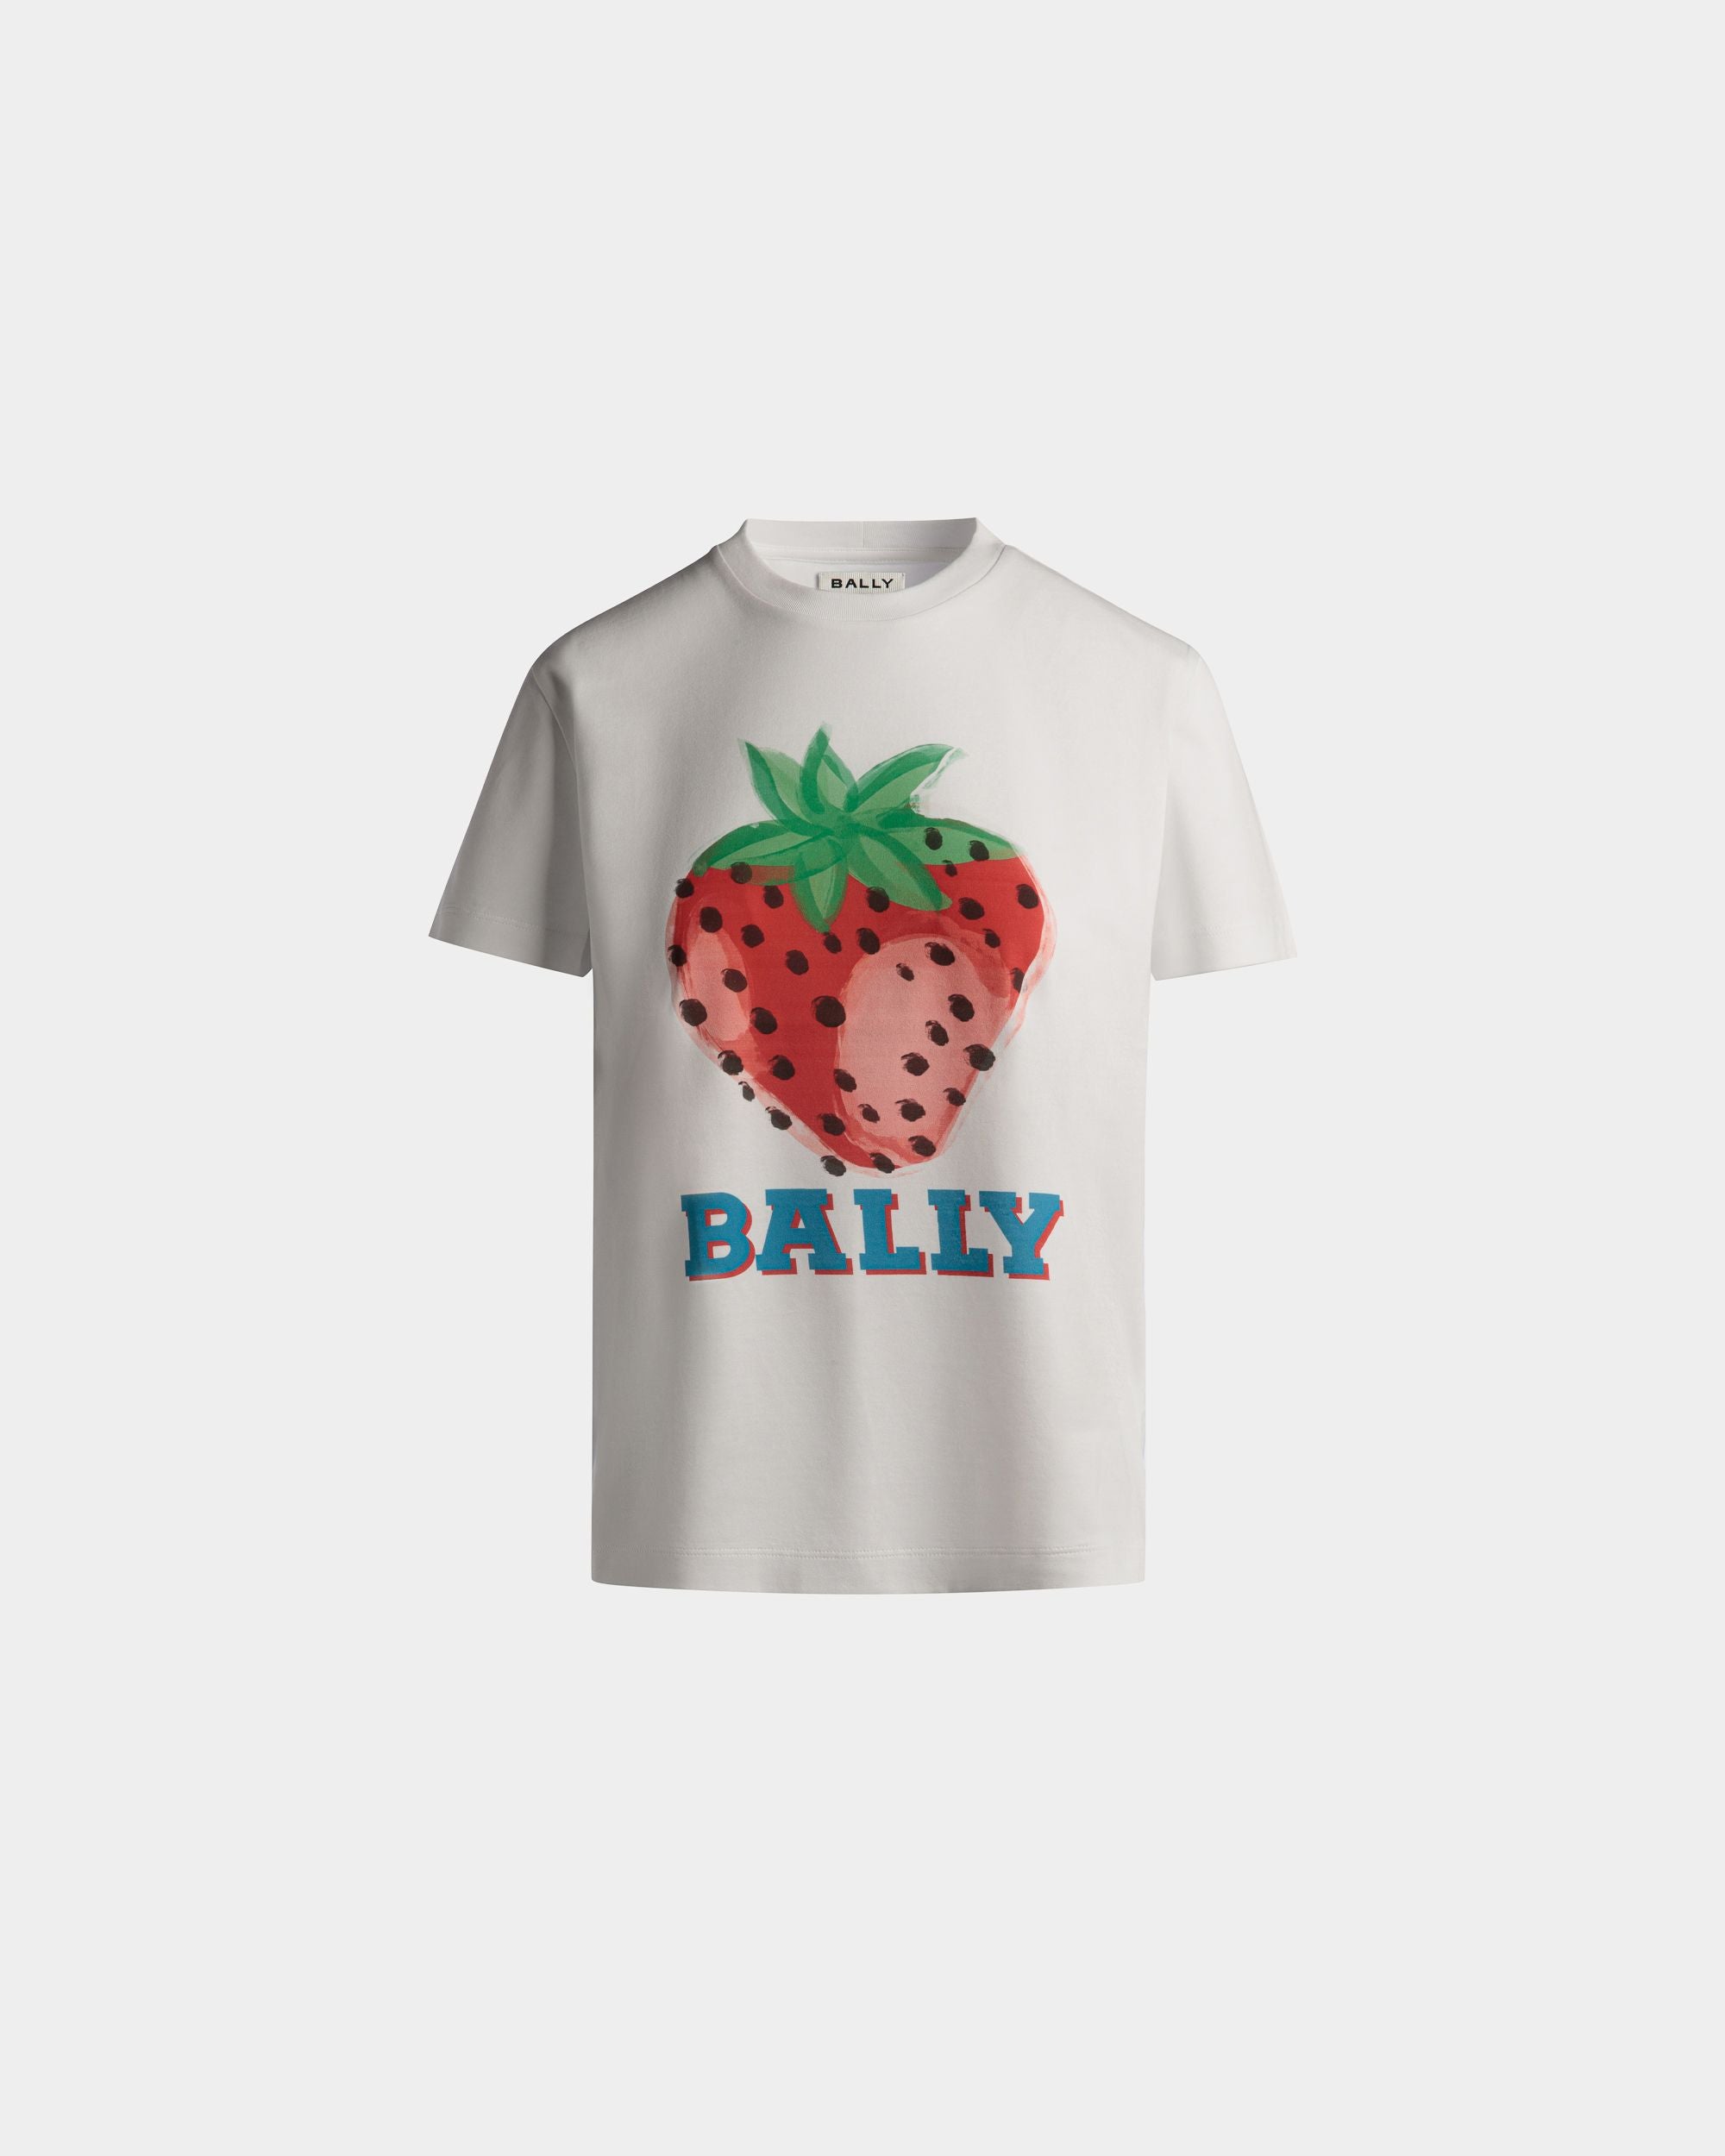 Women's Printed T-Shirt in Strawberry Print Cotton | Bally | Still Life Front